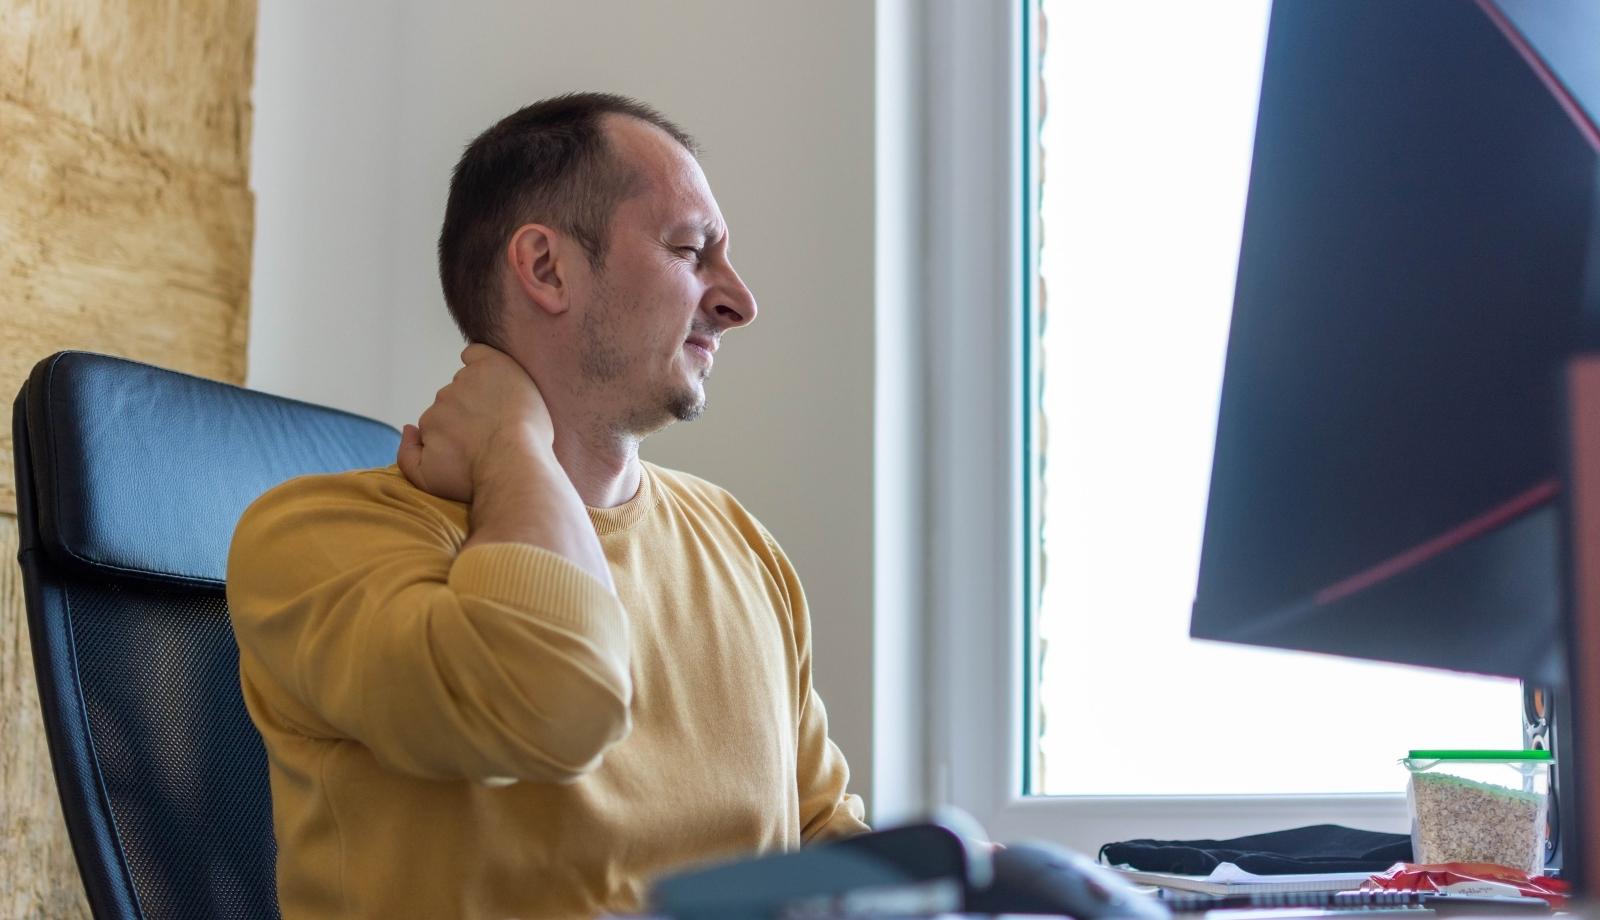 4 Solutions to Prevent Forward Head Posture and Associated Chronic Pain